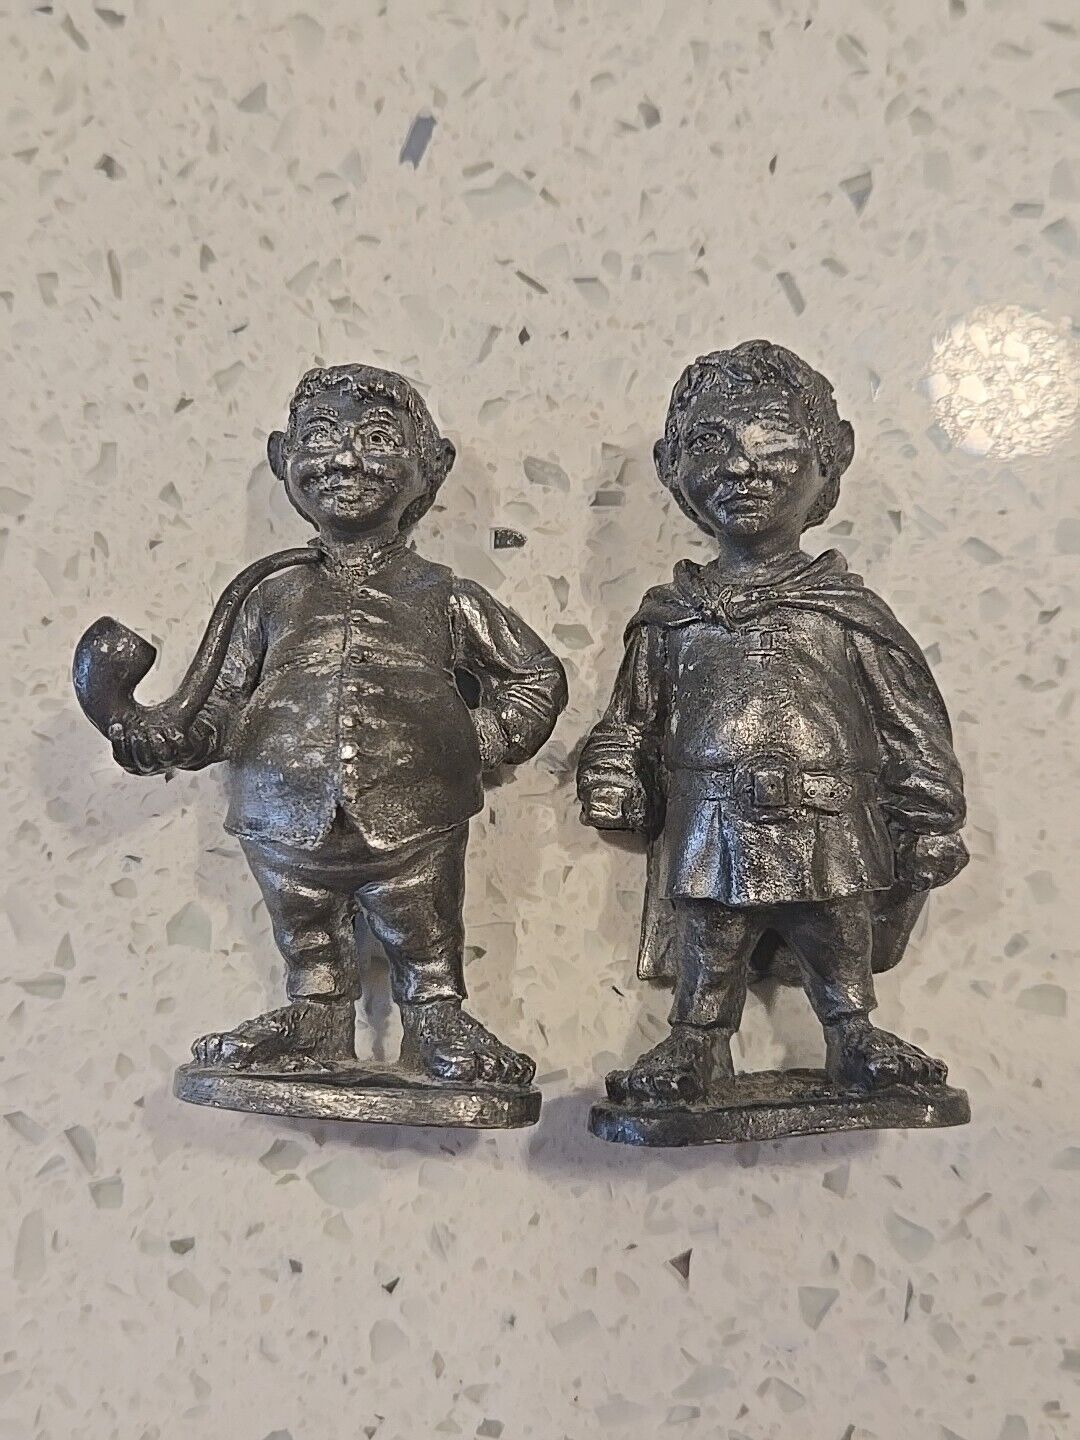 2 1978 TOLKIEN BILBO the HOBBIT Pewter Middle Earth Figurines SUPERIOR MODELS